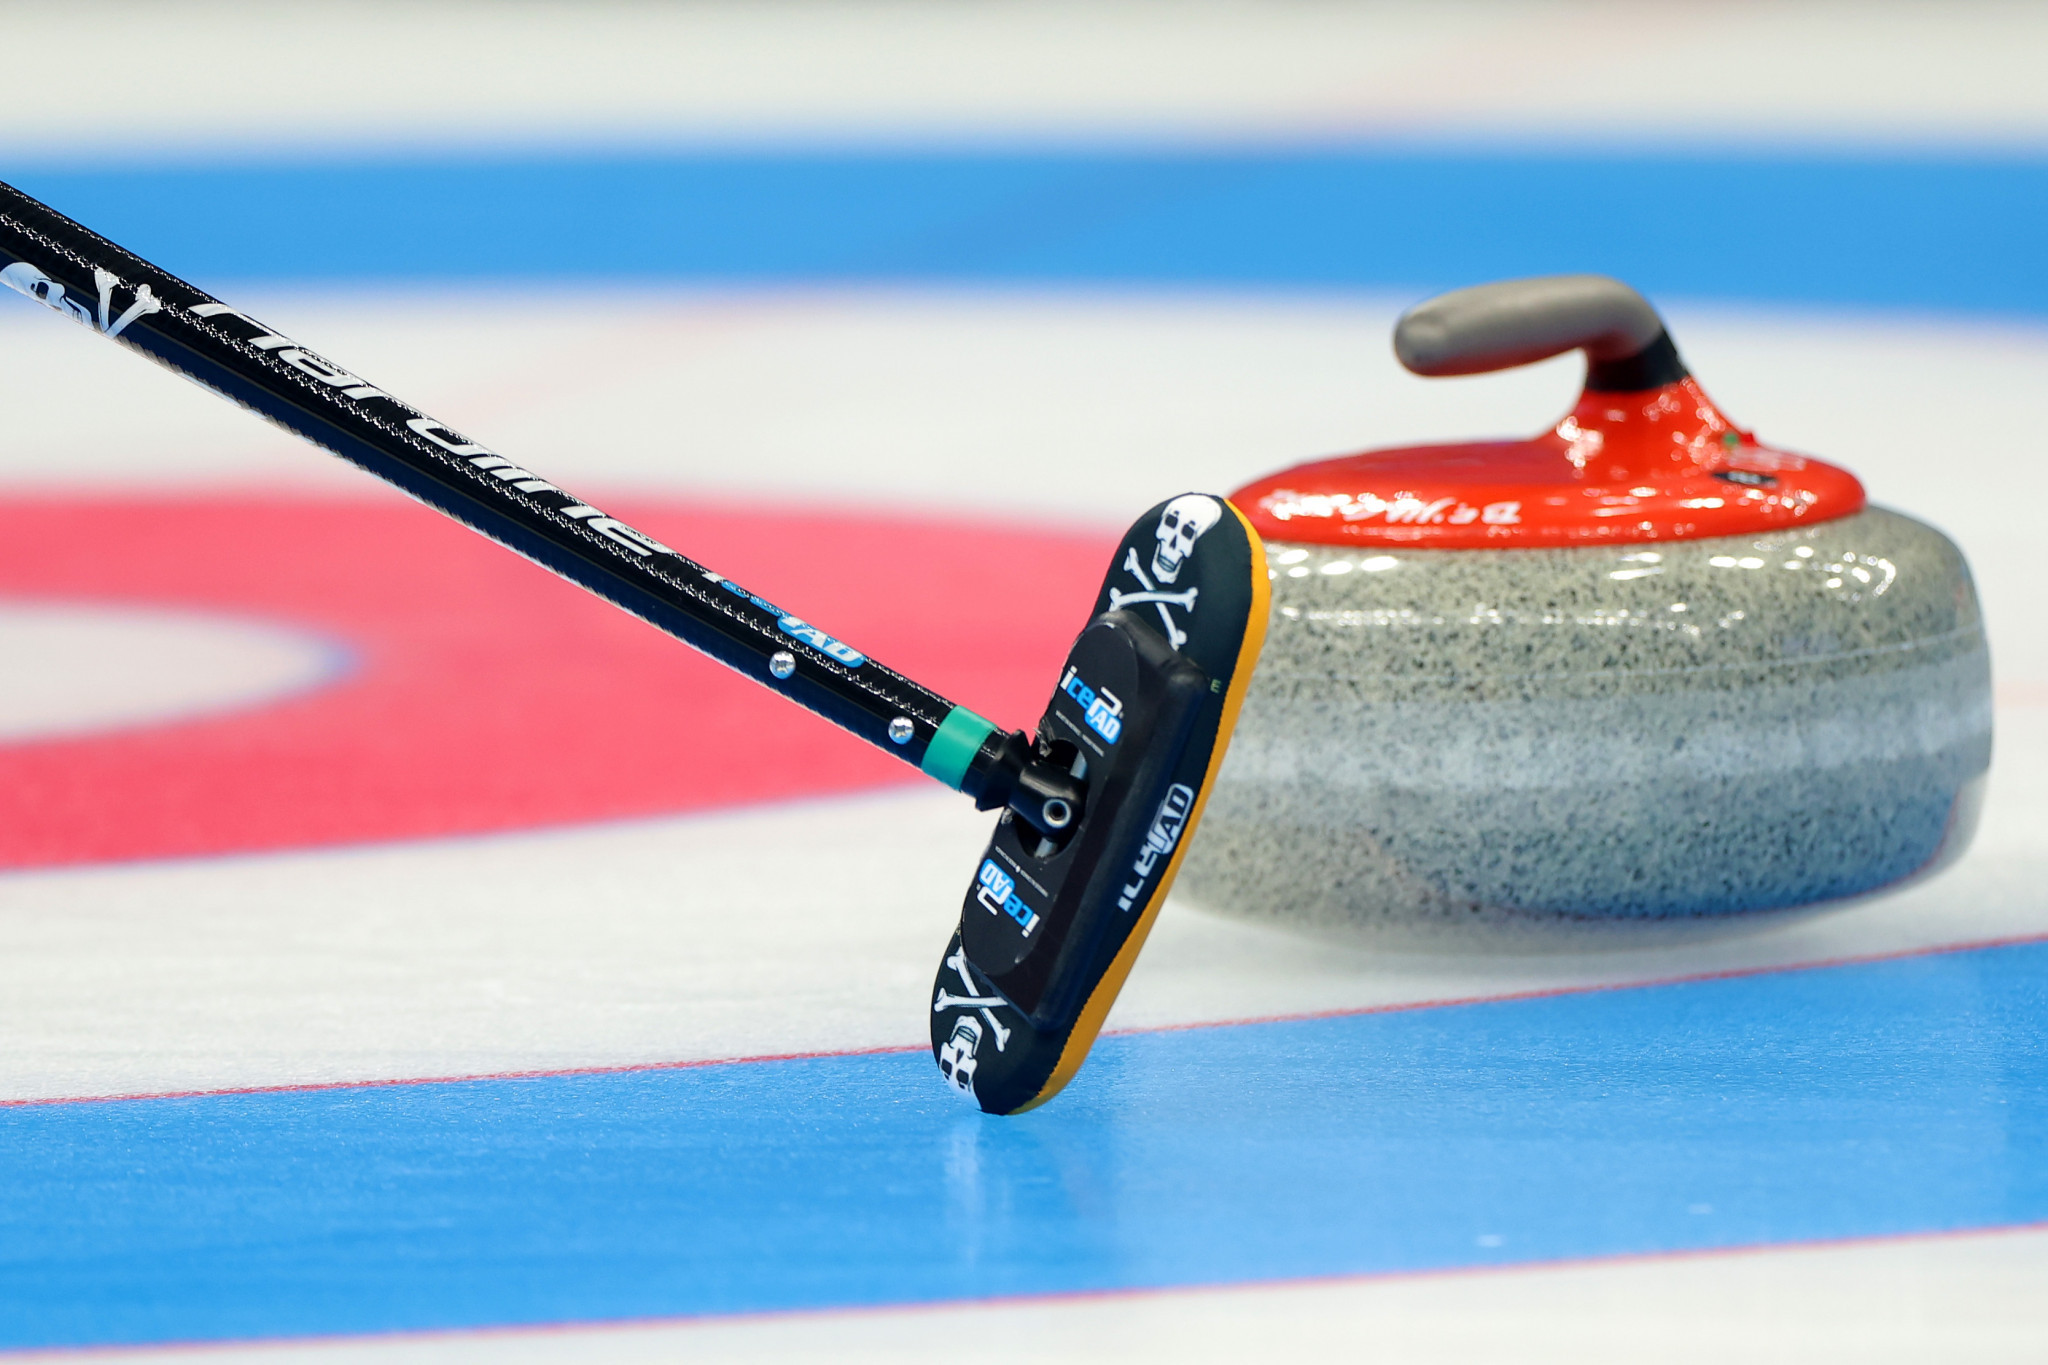 Curling is set to announce a new President next month in Lausanne ©Getty Images